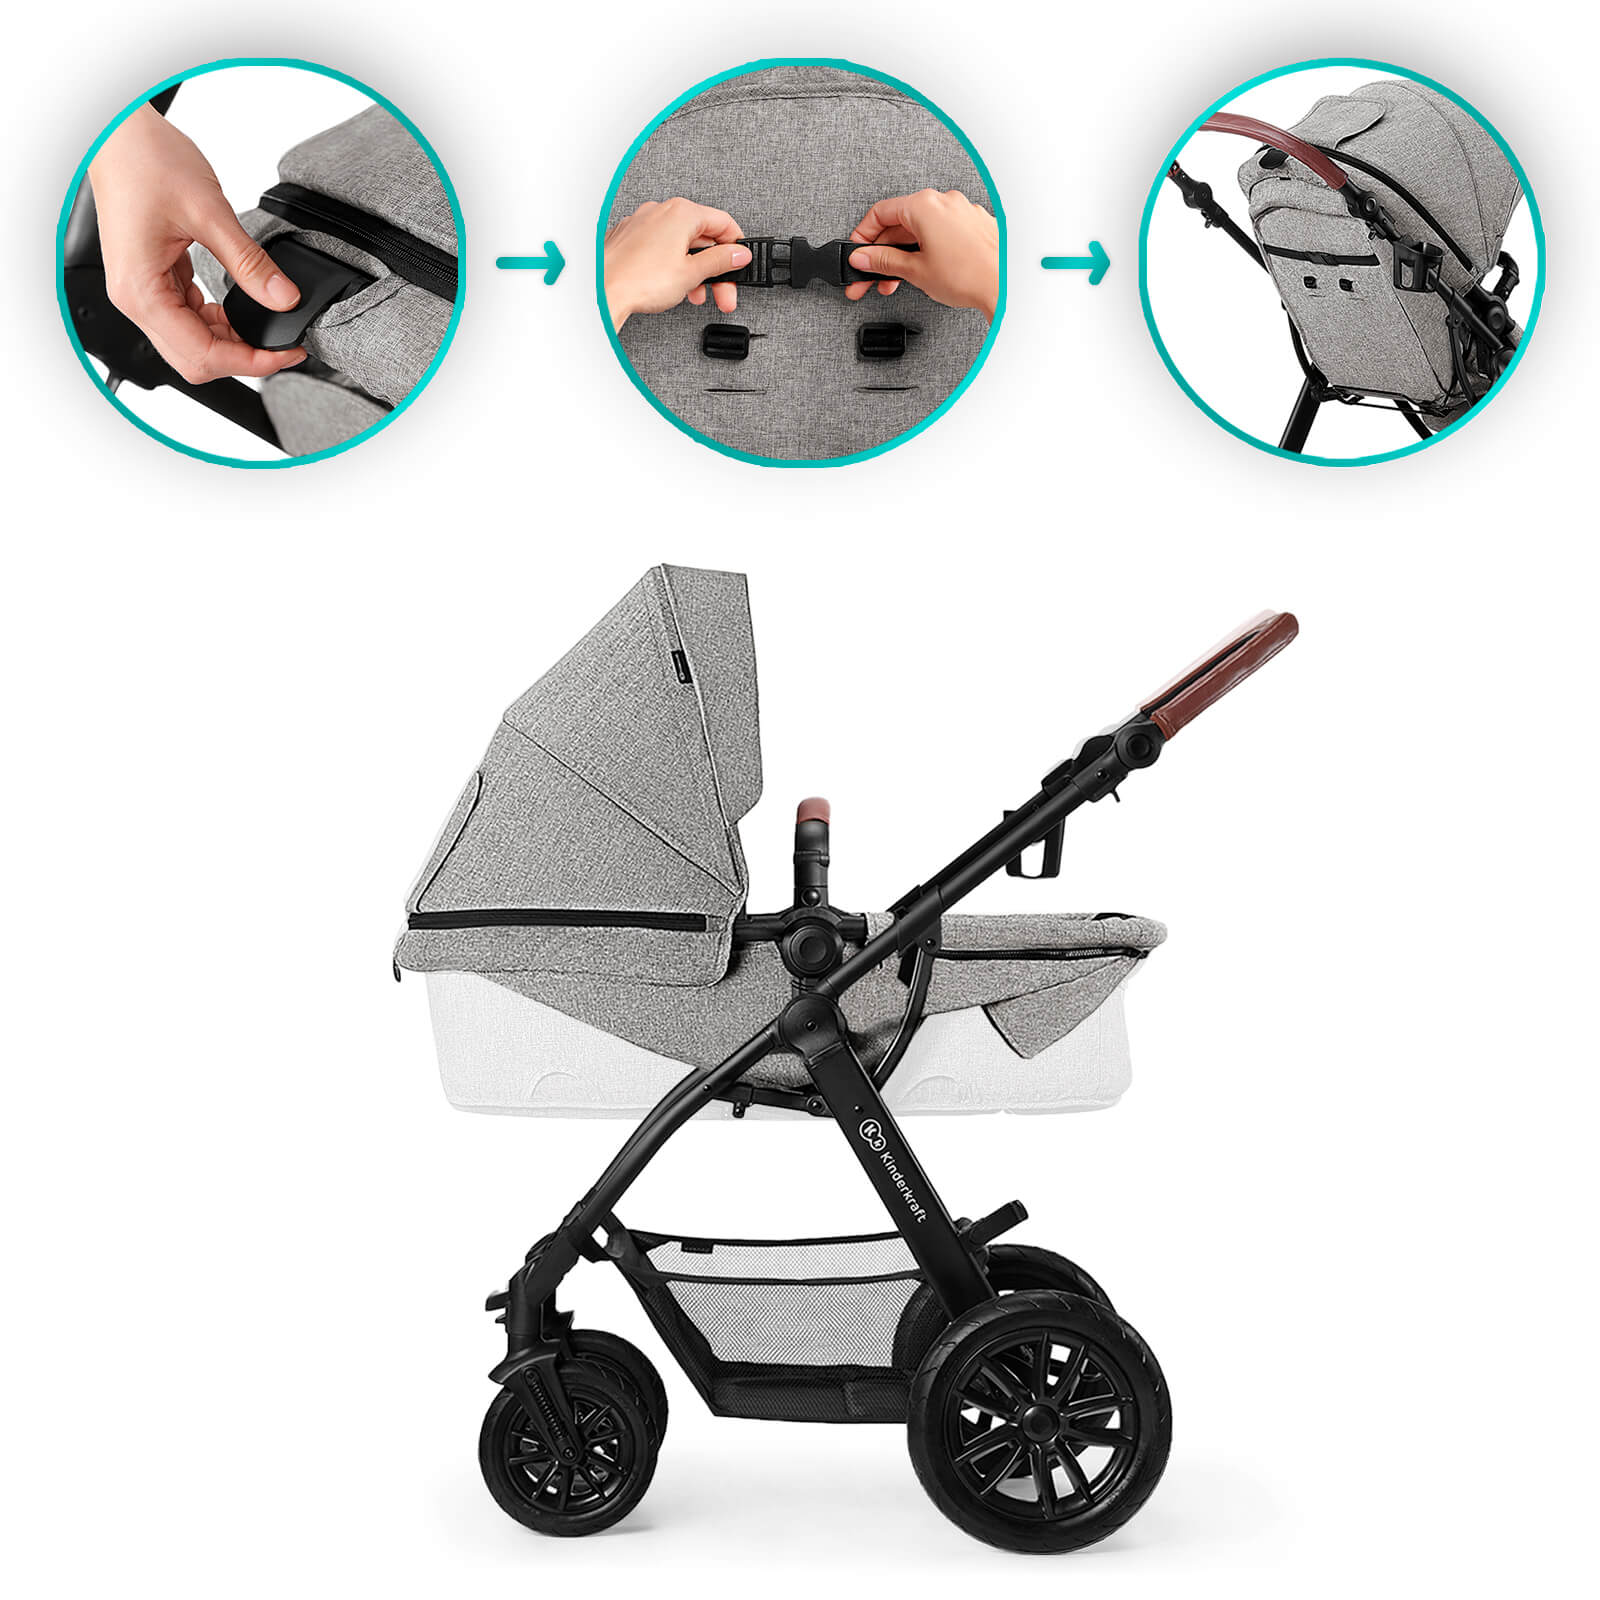 Multifunctional stroller 3in1 XMOOV - Seat 2-in-1: a carrycot and a stroller